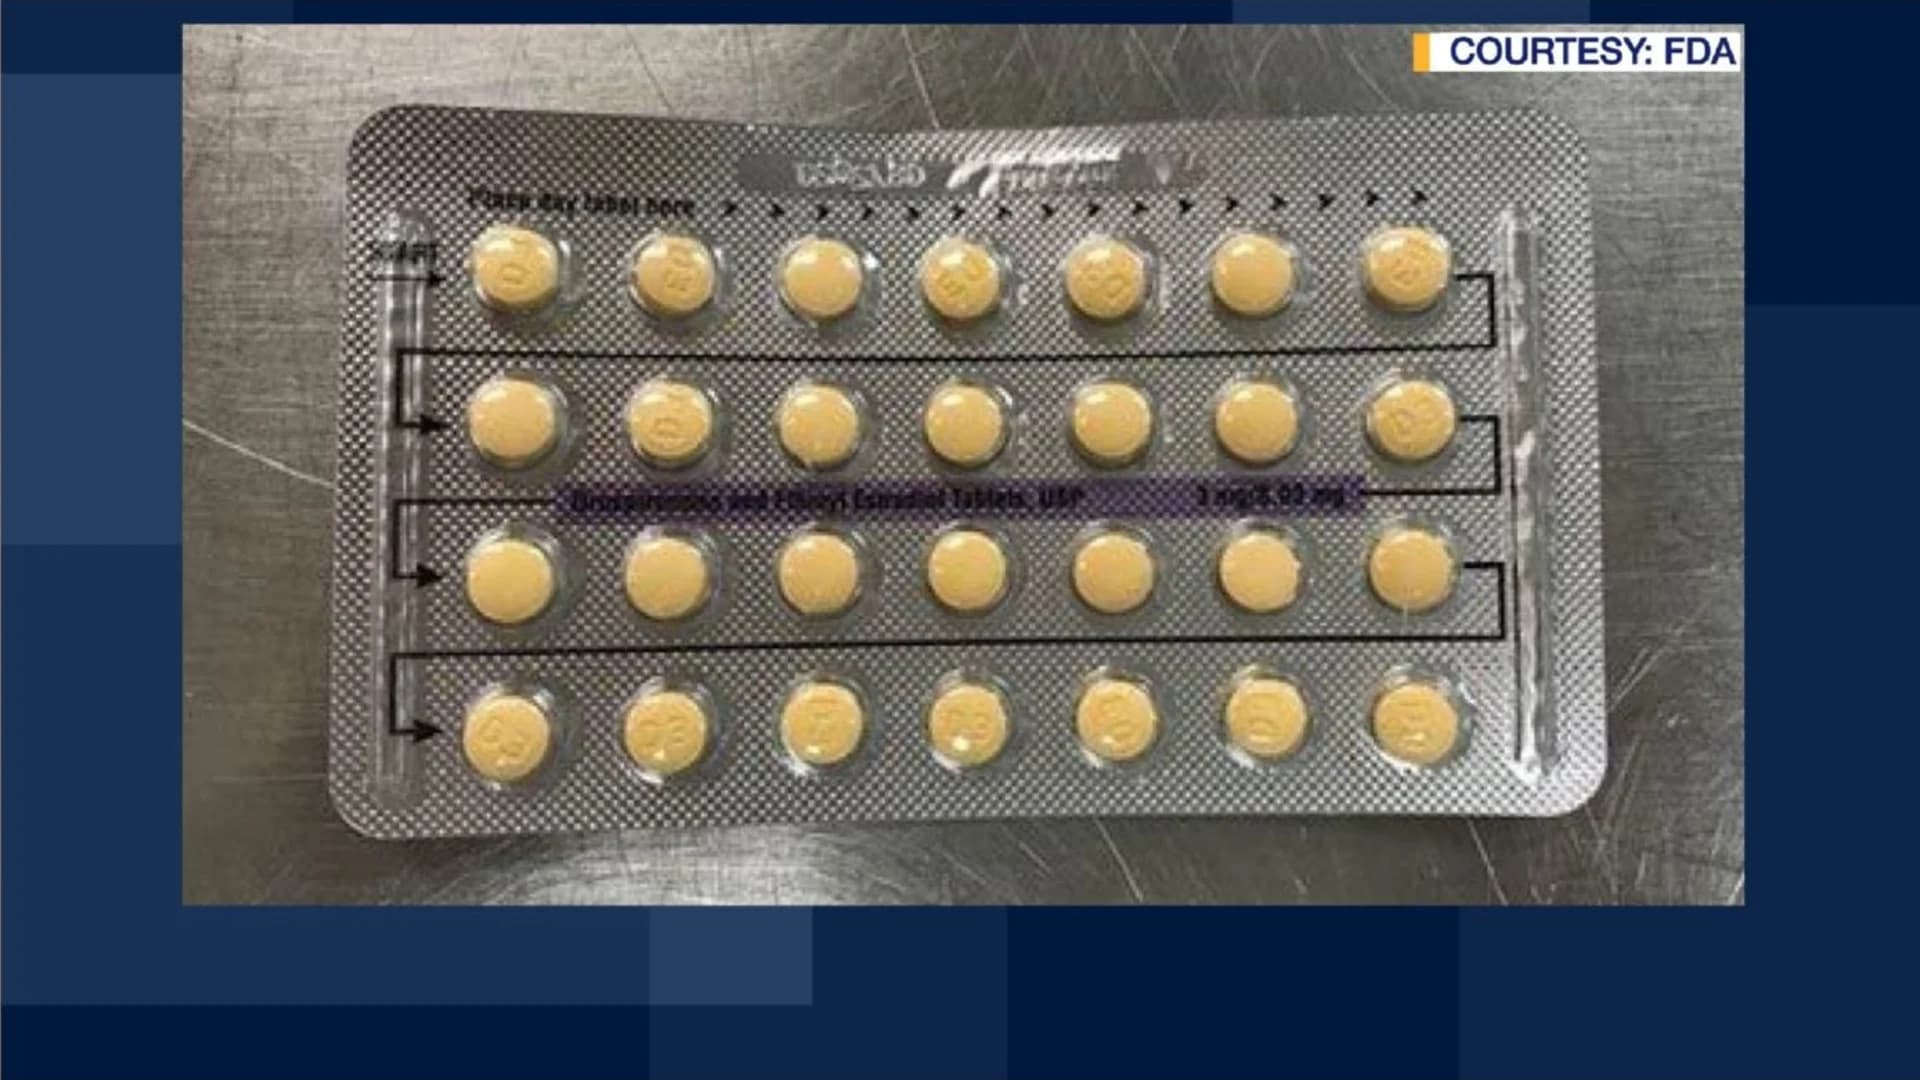 Company issues birth control pill recall due to packaging issues